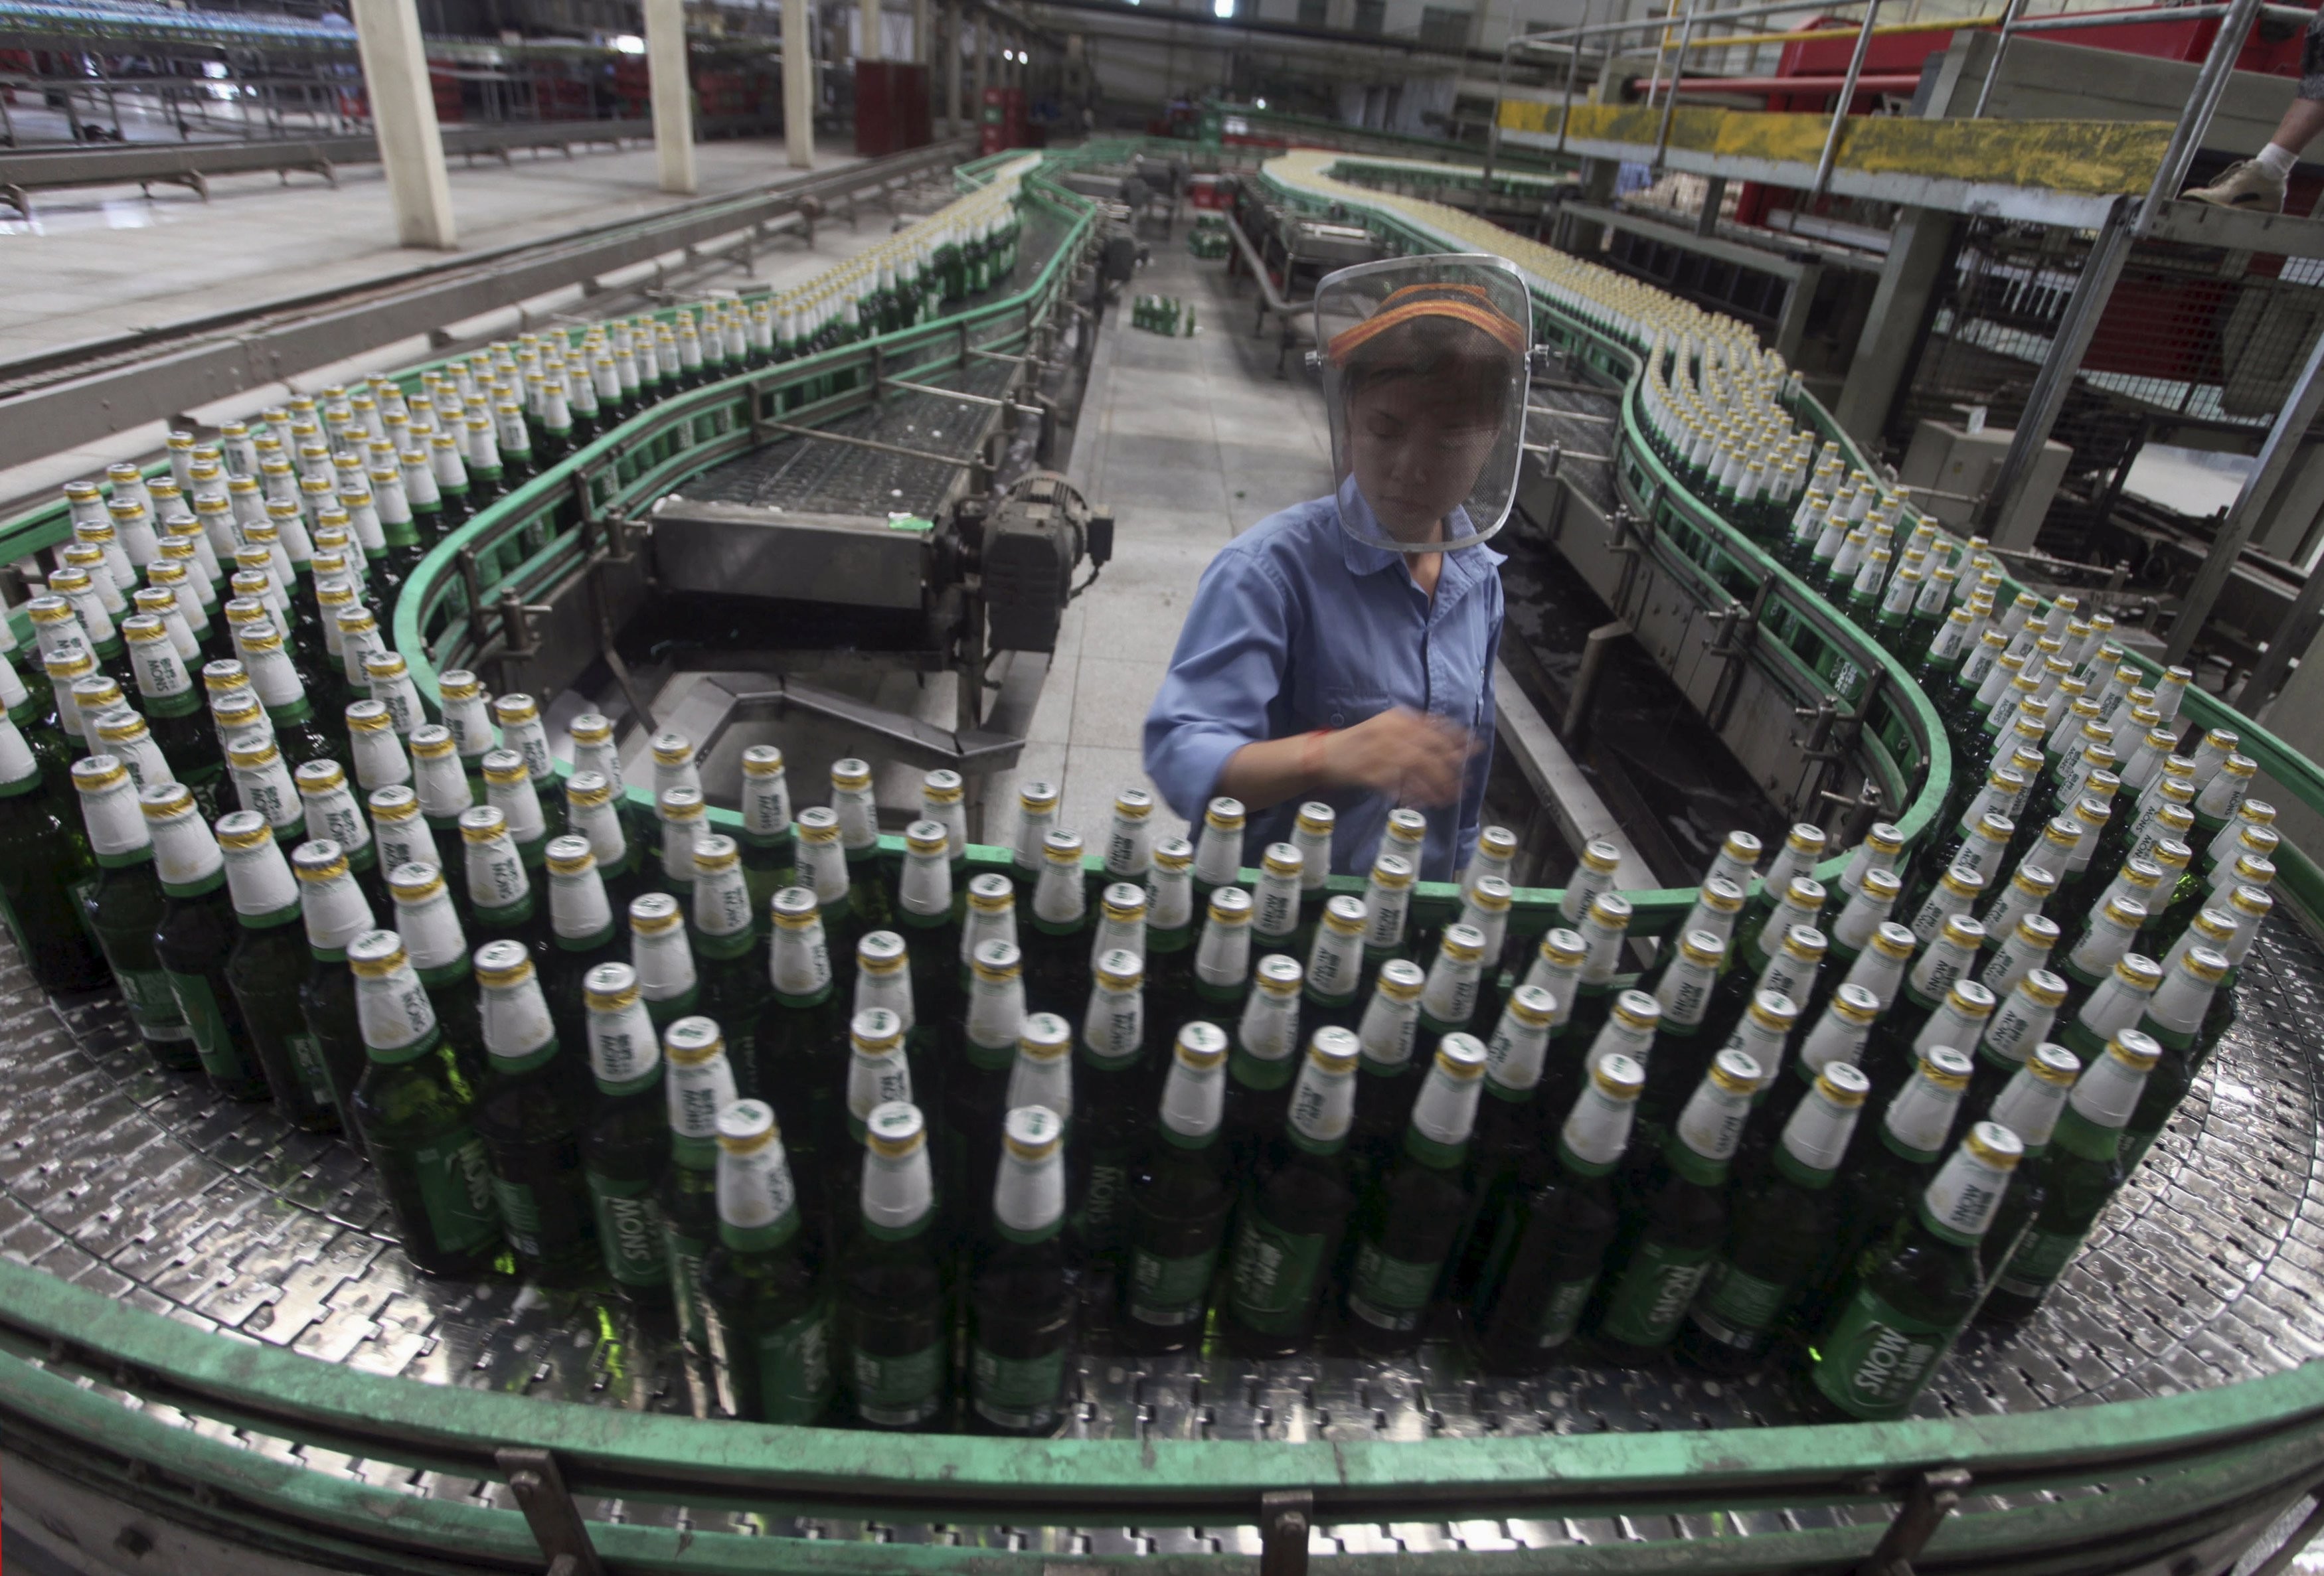 Chinese breweries are recovering from stagnated beer consumption in recent years, as the results showed